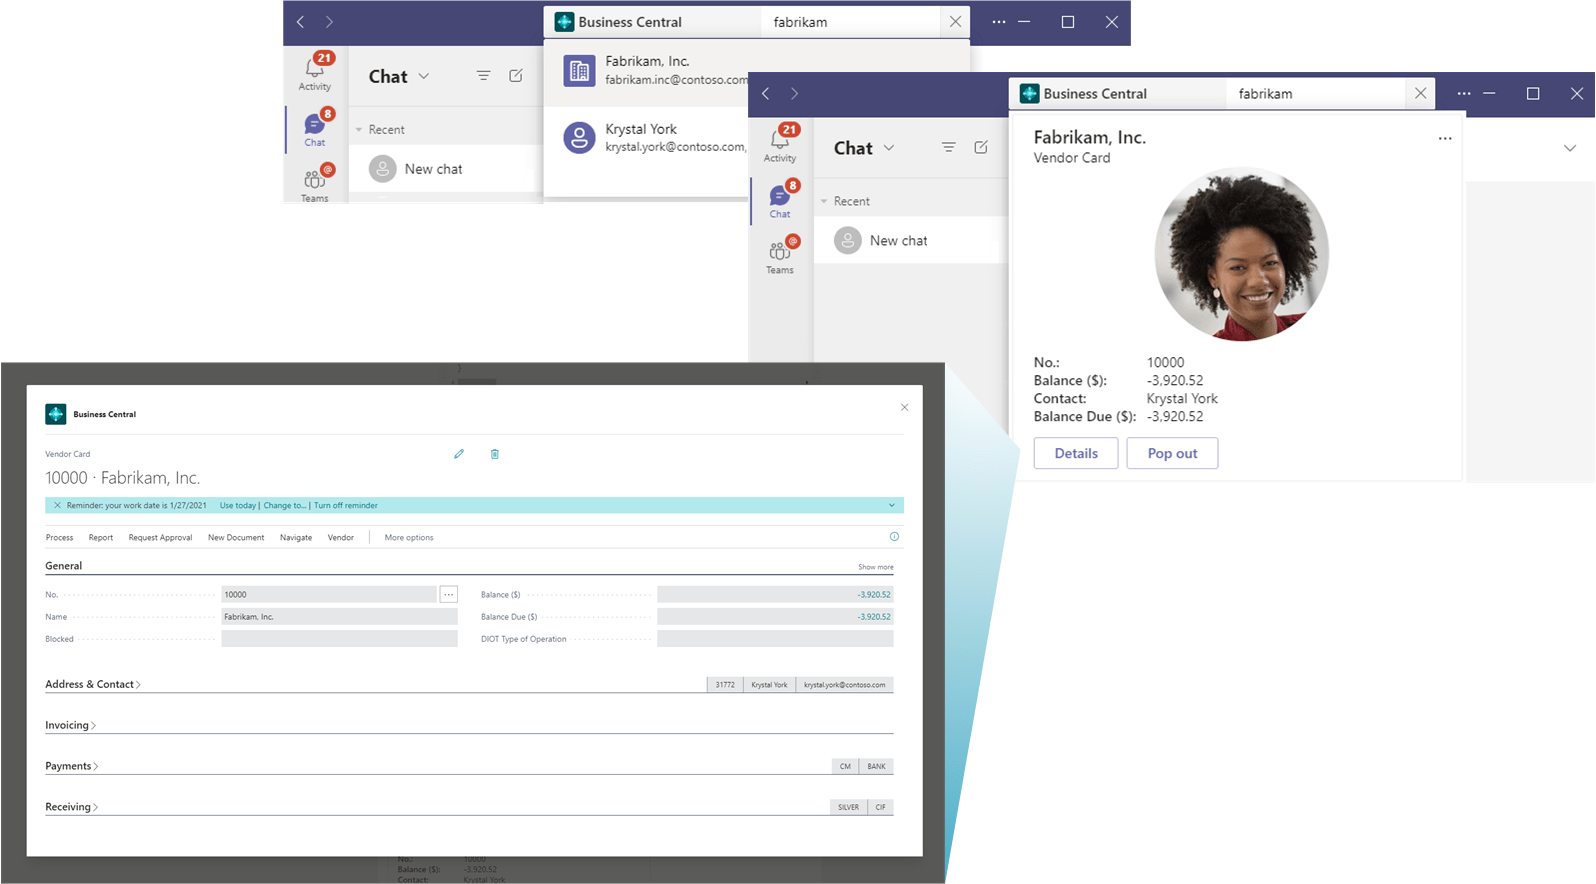 Business Central visible in Microsoft Teams | VanRoey.be